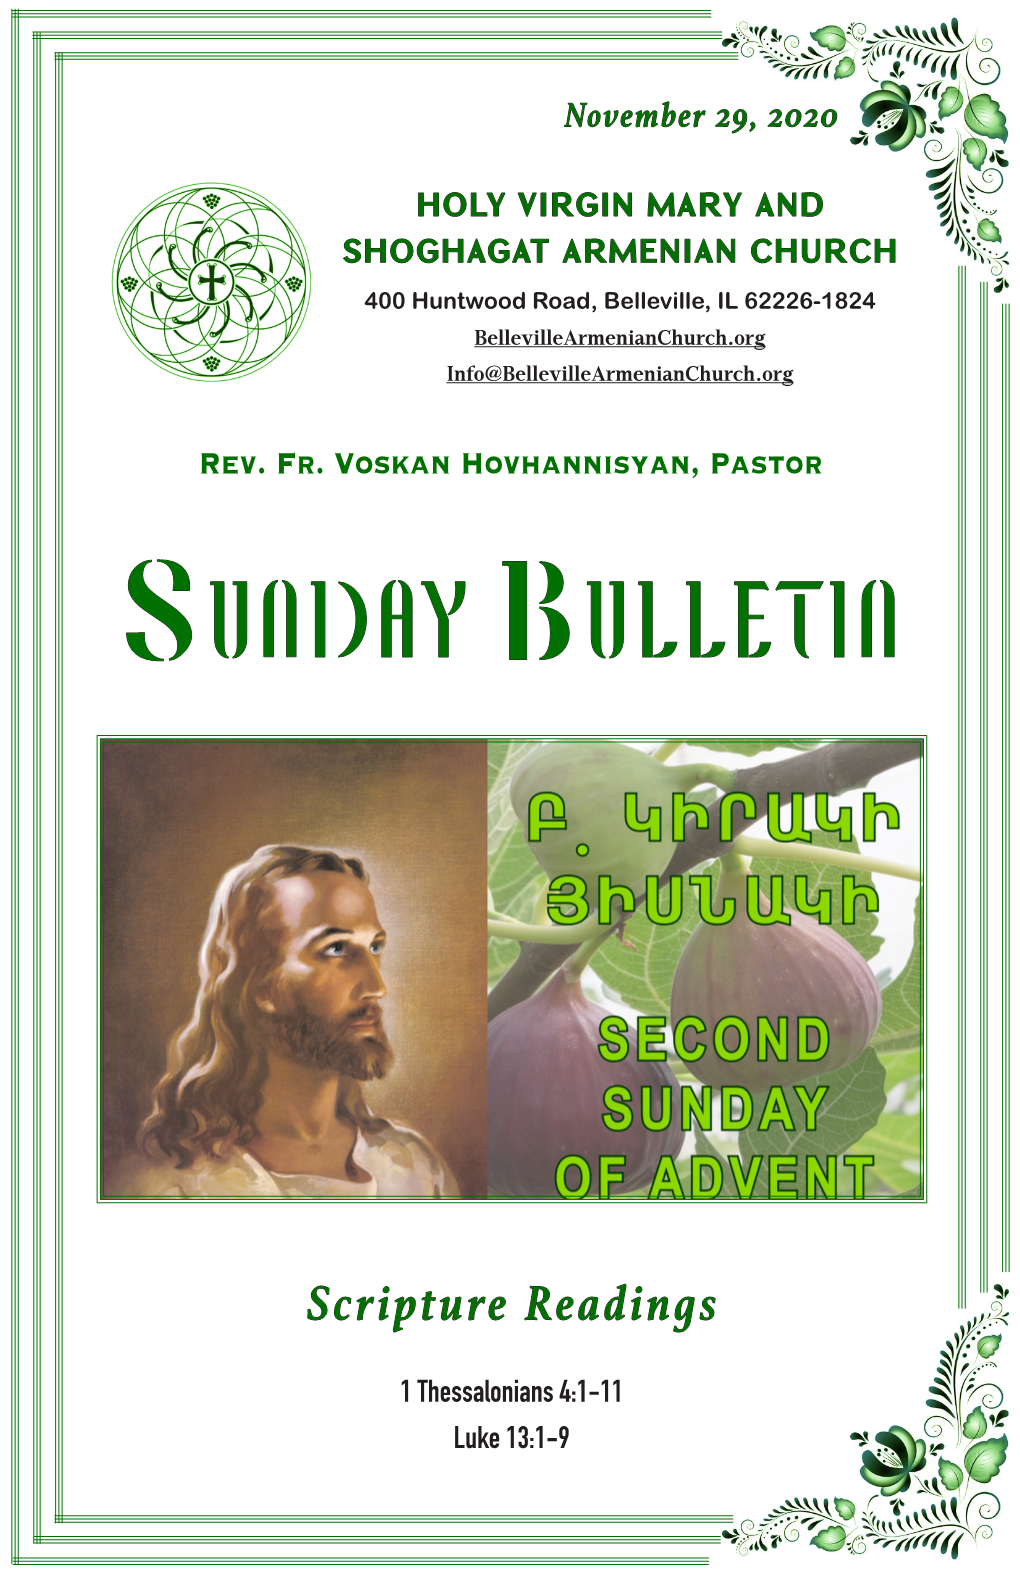 Sunday Bulletin - Announcements for the Sunday Bulletin Are Lisa Bedian, Due in the Church Office by 5:00 Pm on Wednesday Preceding Advisor the Date of Service